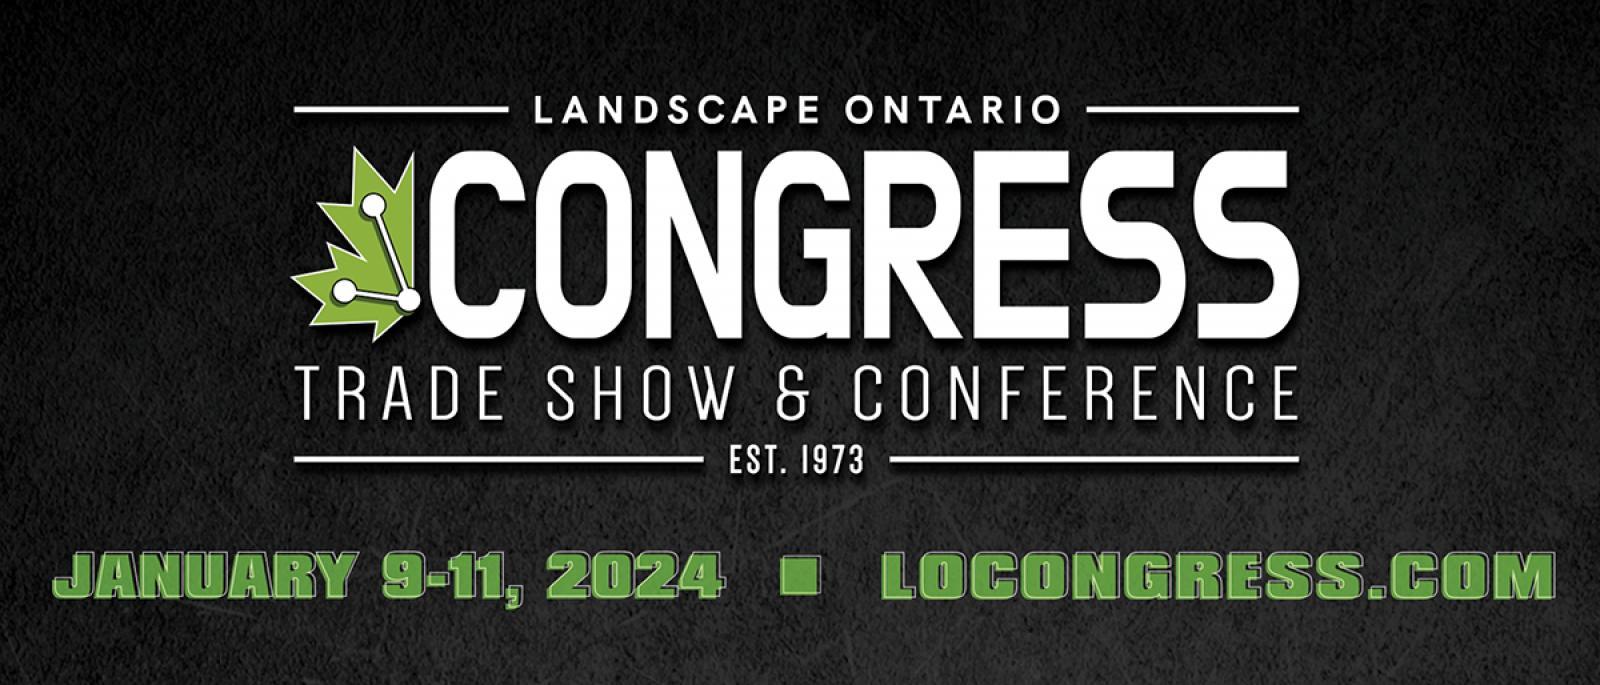 Registration now open for 2024 Congress Conference